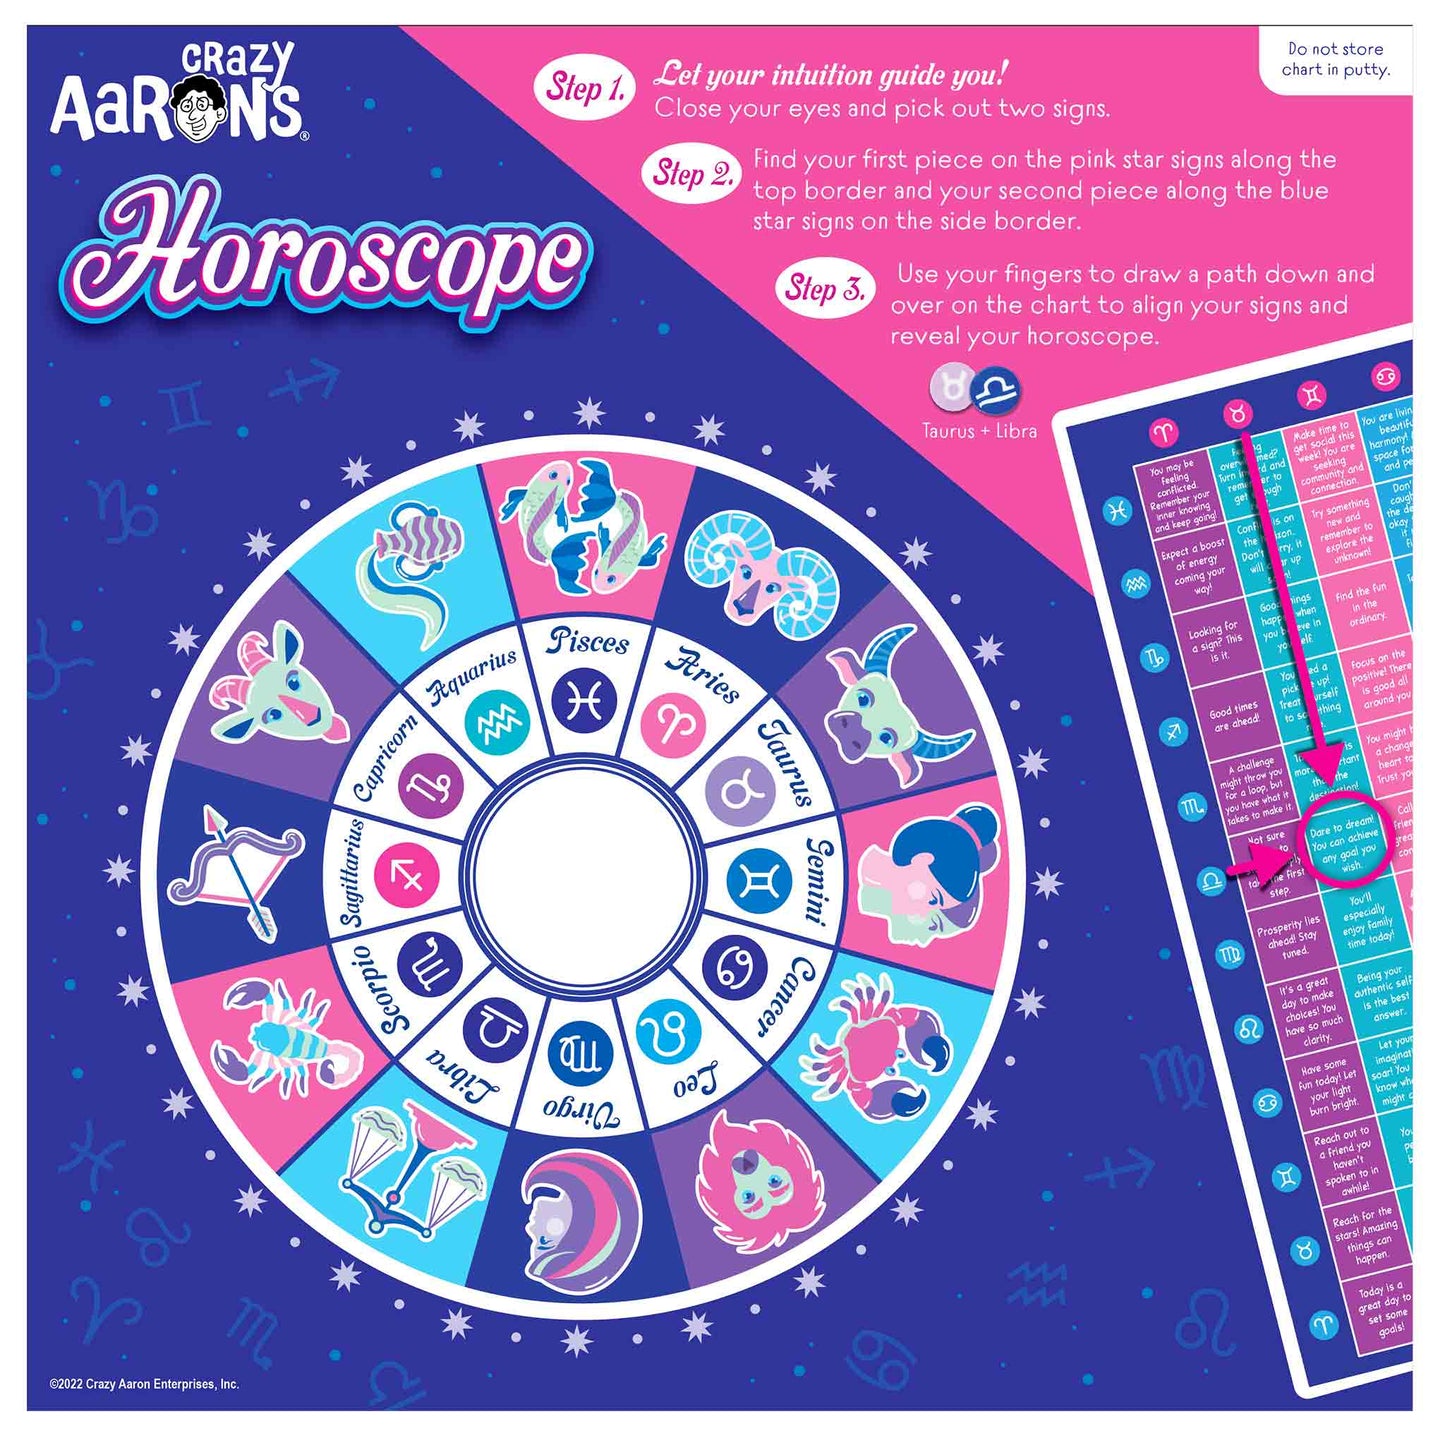 Horoscope Putty, Crazy Aarons Thinking Putty, eco-friendly Toys, Mountain Kids Toys